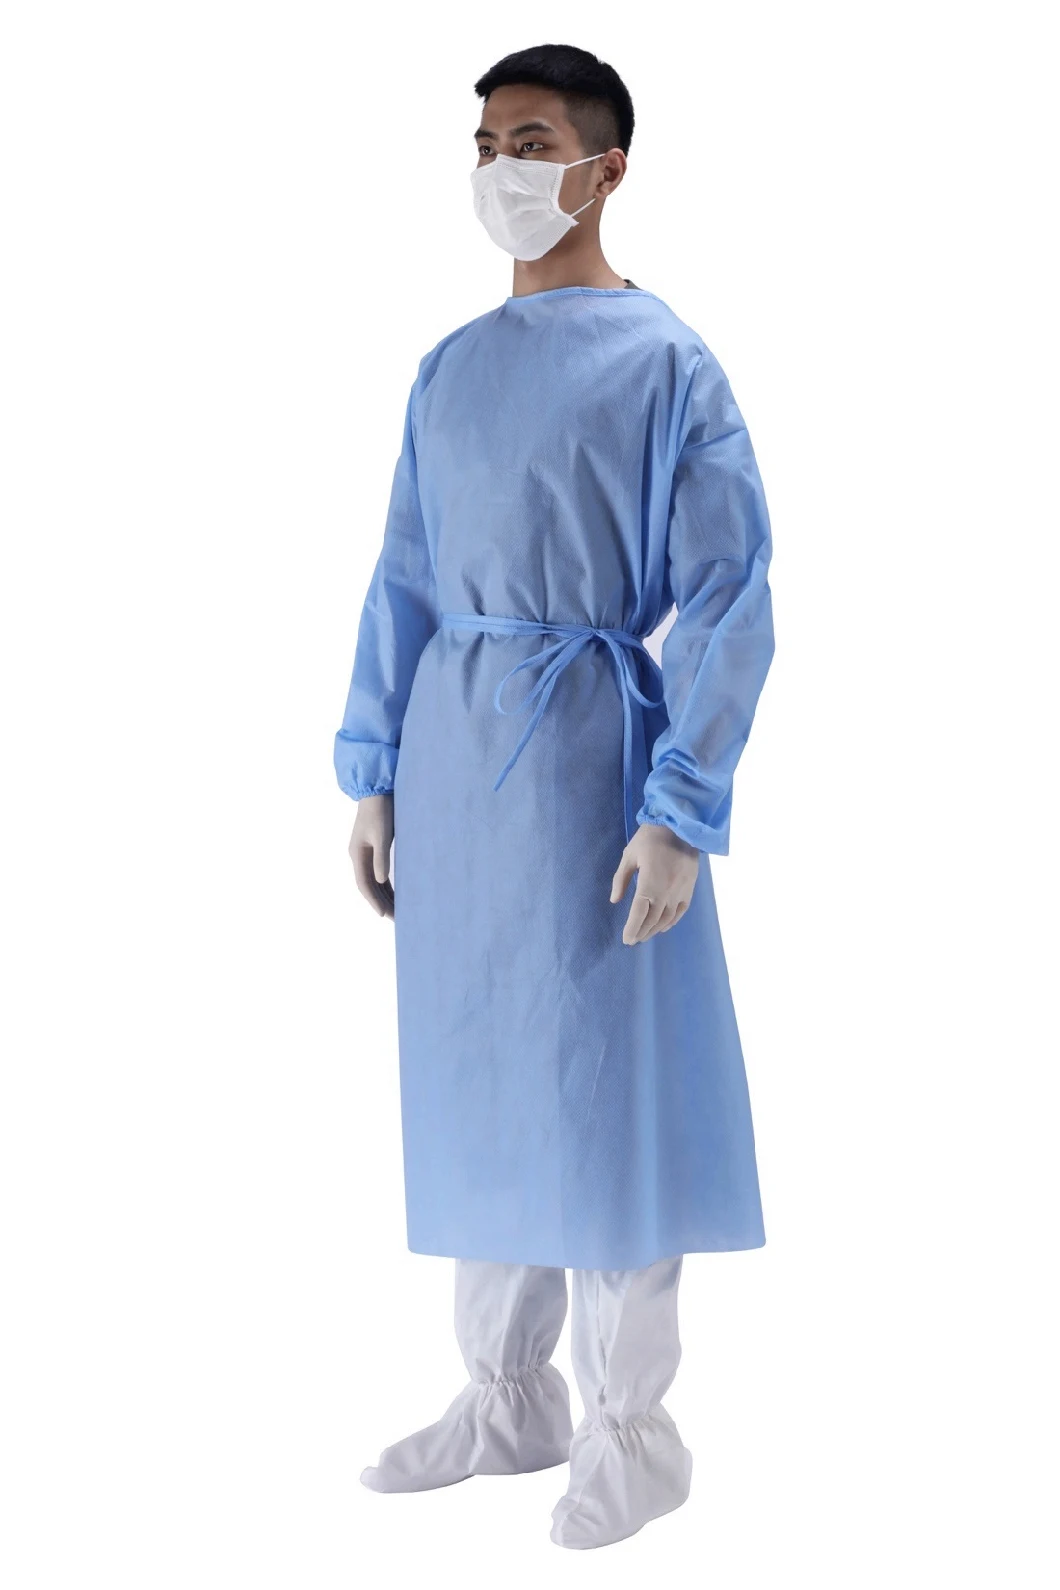 Gowns Disposable Isolation Gowns Non-Woven Isolation Gowns Protective Overalls